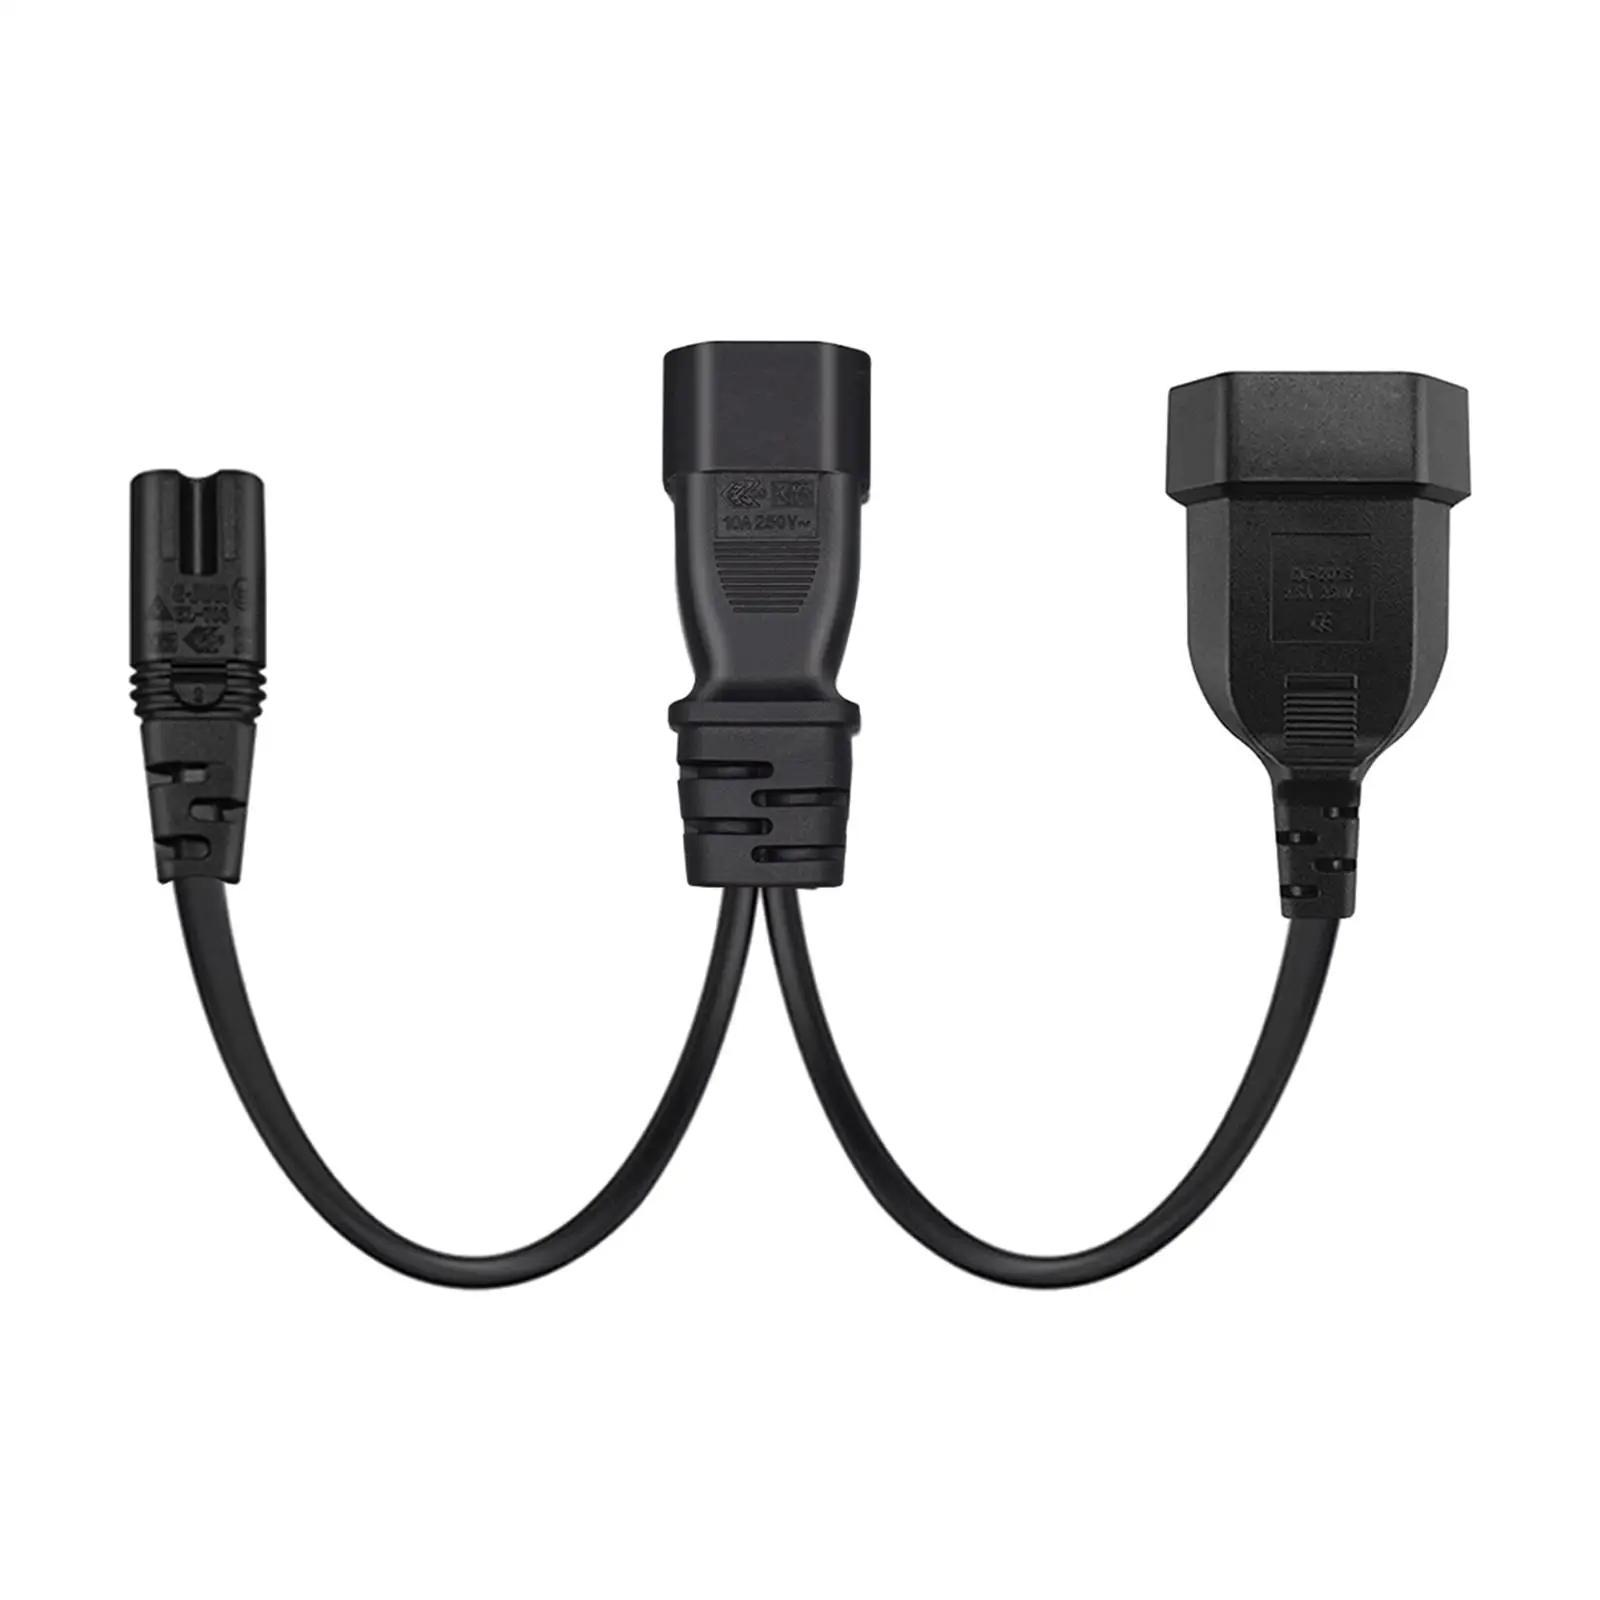 IEC 320 C14 Male to C7 and EU Y Split Power Adapter Cord 1 Replacement Power Line